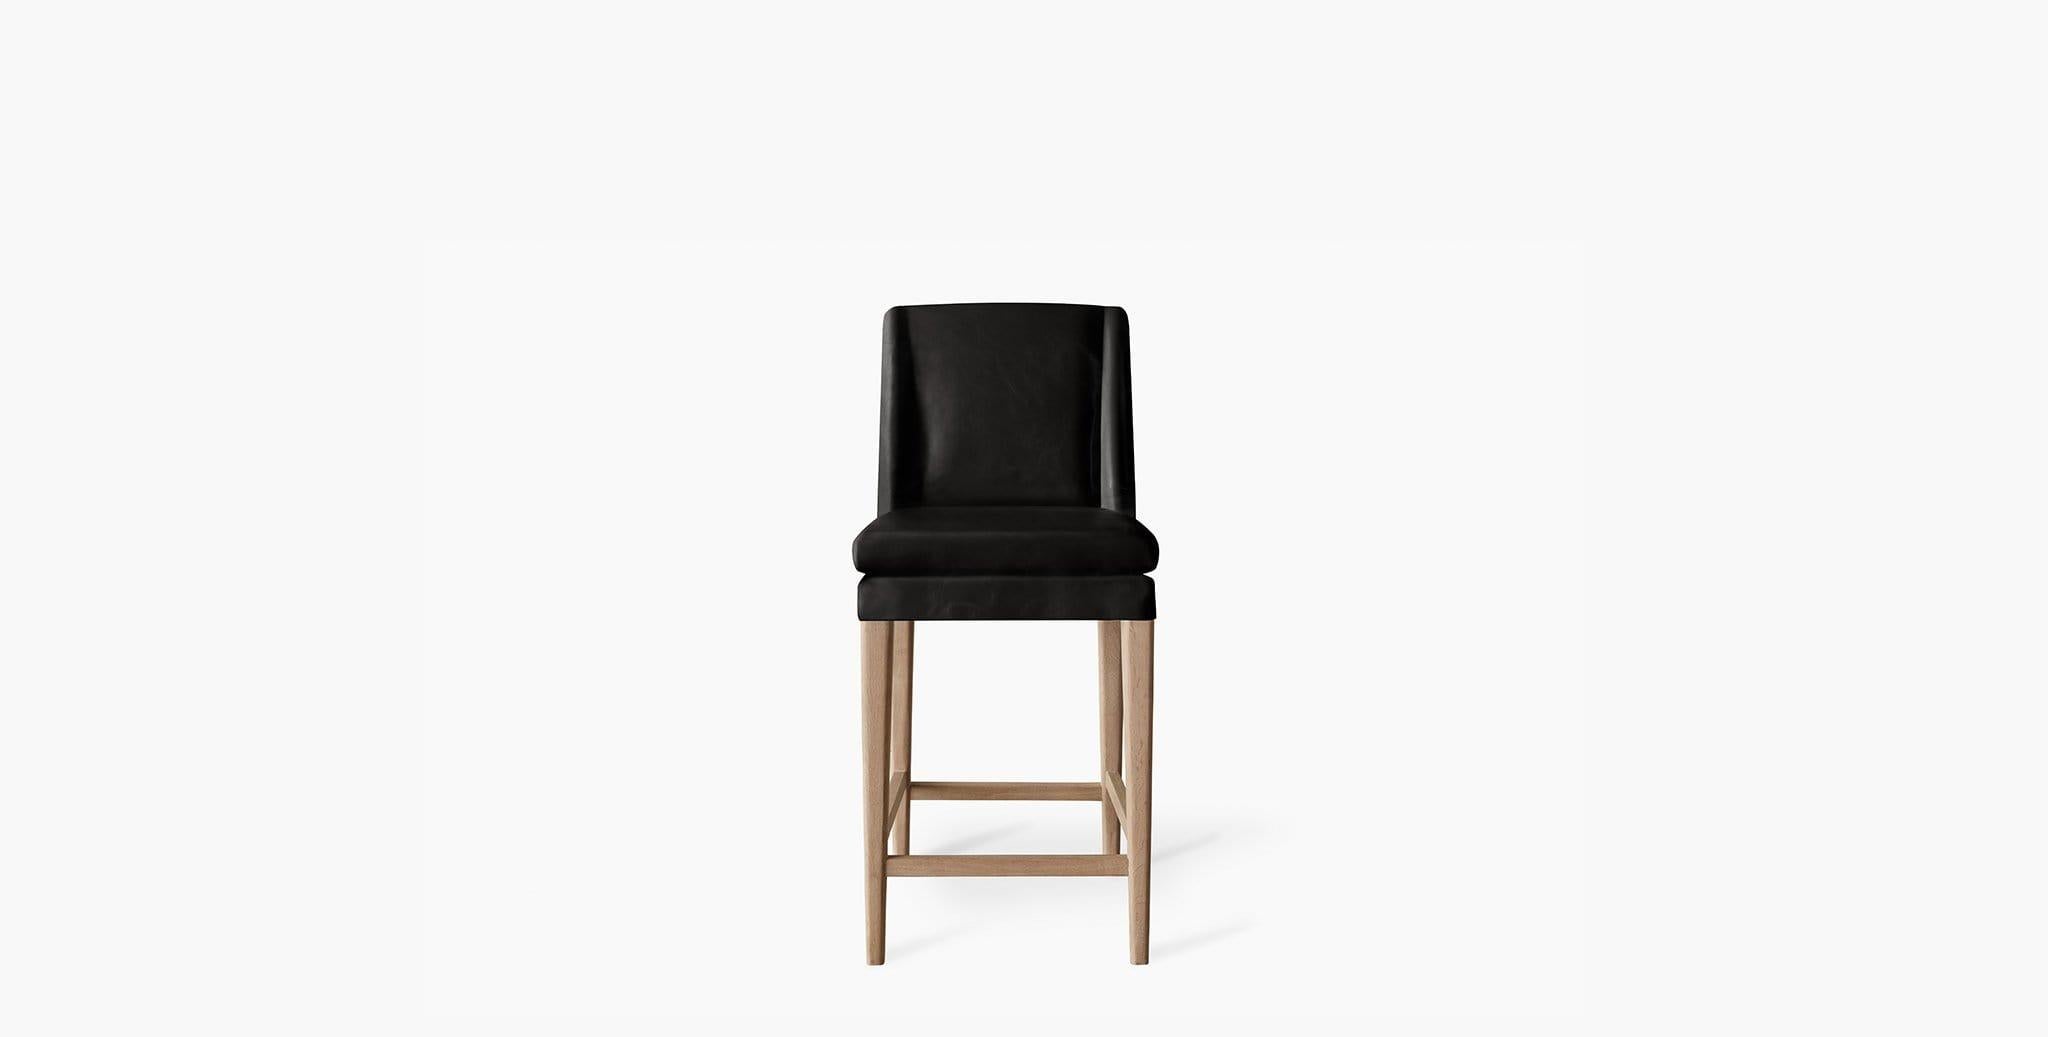 Our Pomona Bar Stool offers a comfortably padded seat and supportive back in warm grey oak. Our handcrafted fabrics, leathers, and finishes are inspired by the natural variations within fibers, textures, and weaves. Each selection is one-of-a-kind